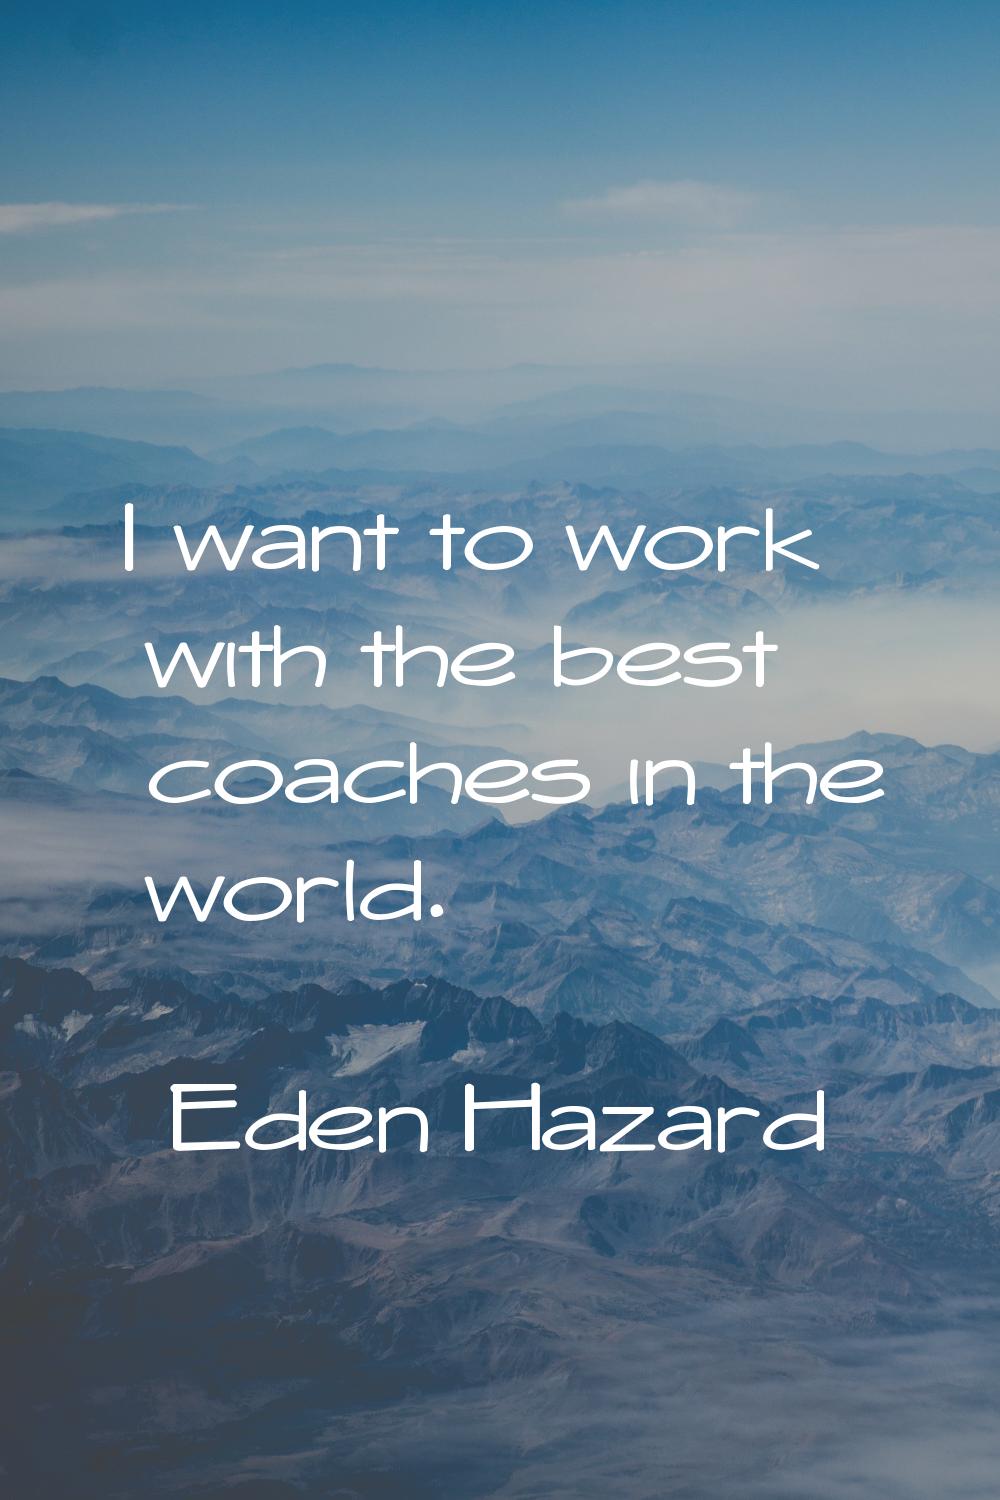 I want to work with the best coaches in the world.